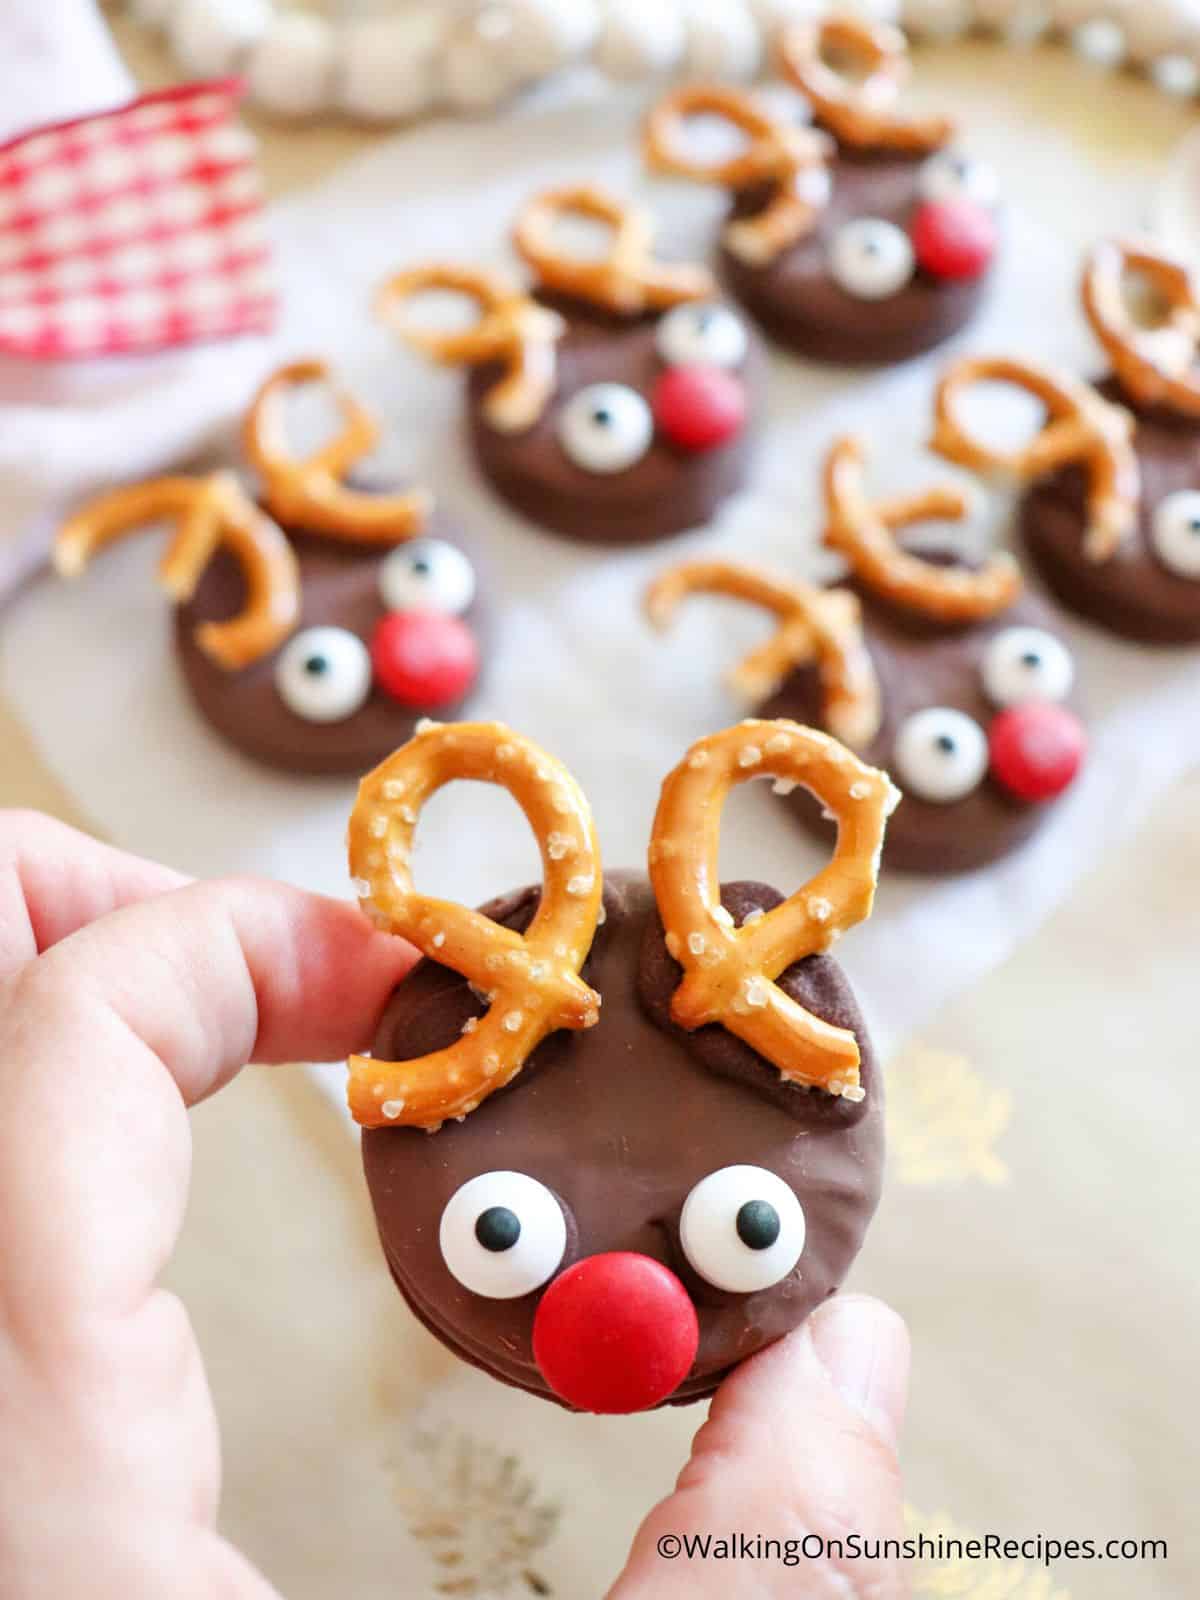 Reindeer cookies made with chocolate covered peanut butter cookies.